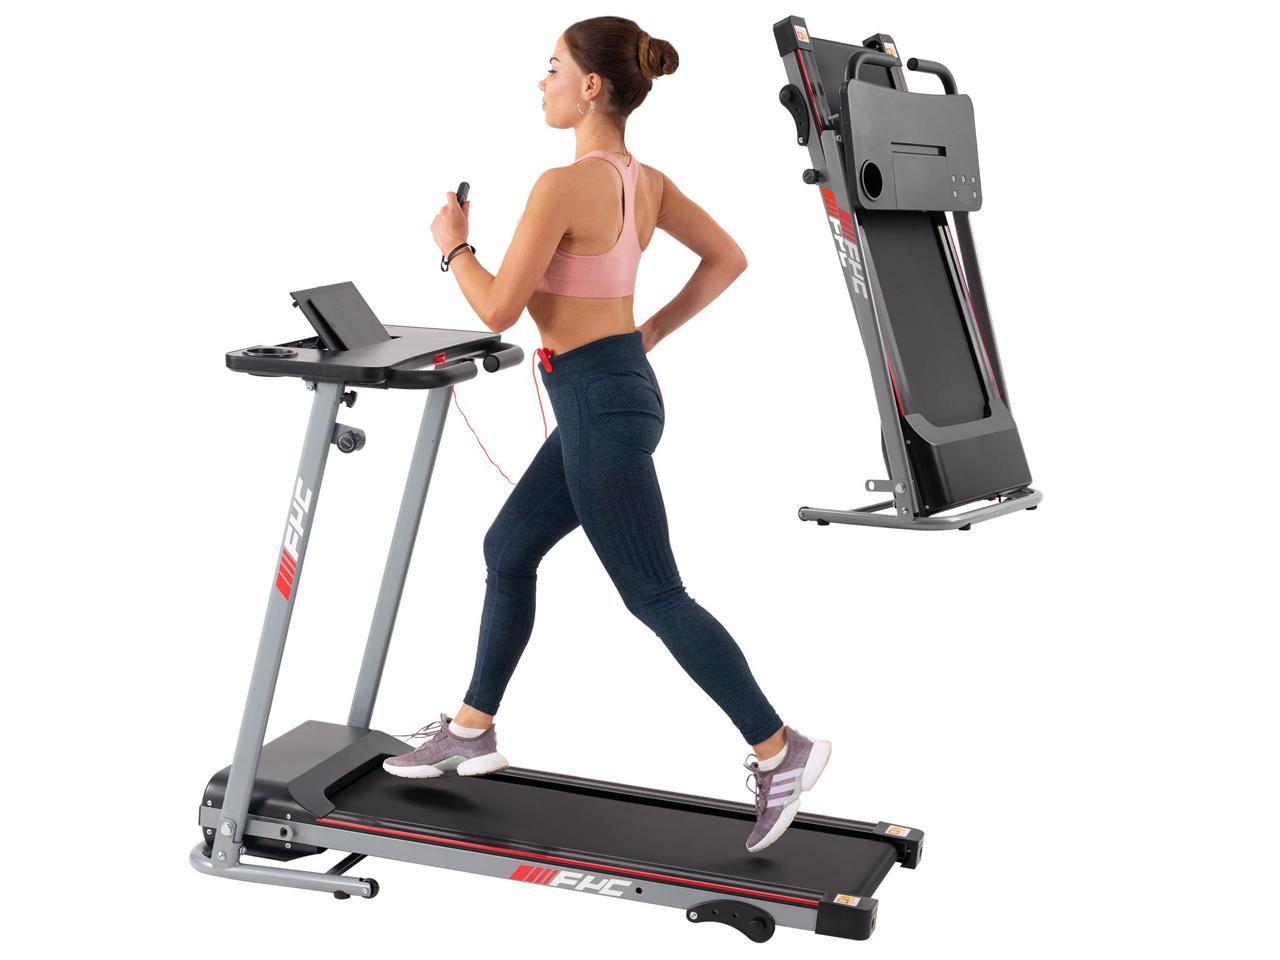 Walking Running Machines for Home for Home Office Fitness 0.8-12km/h Under Desk Treadmill with 12 Training Modes,Remote/APP Control,LED Display 2.25HP Silver 2 in 1 Folding Treadmill 